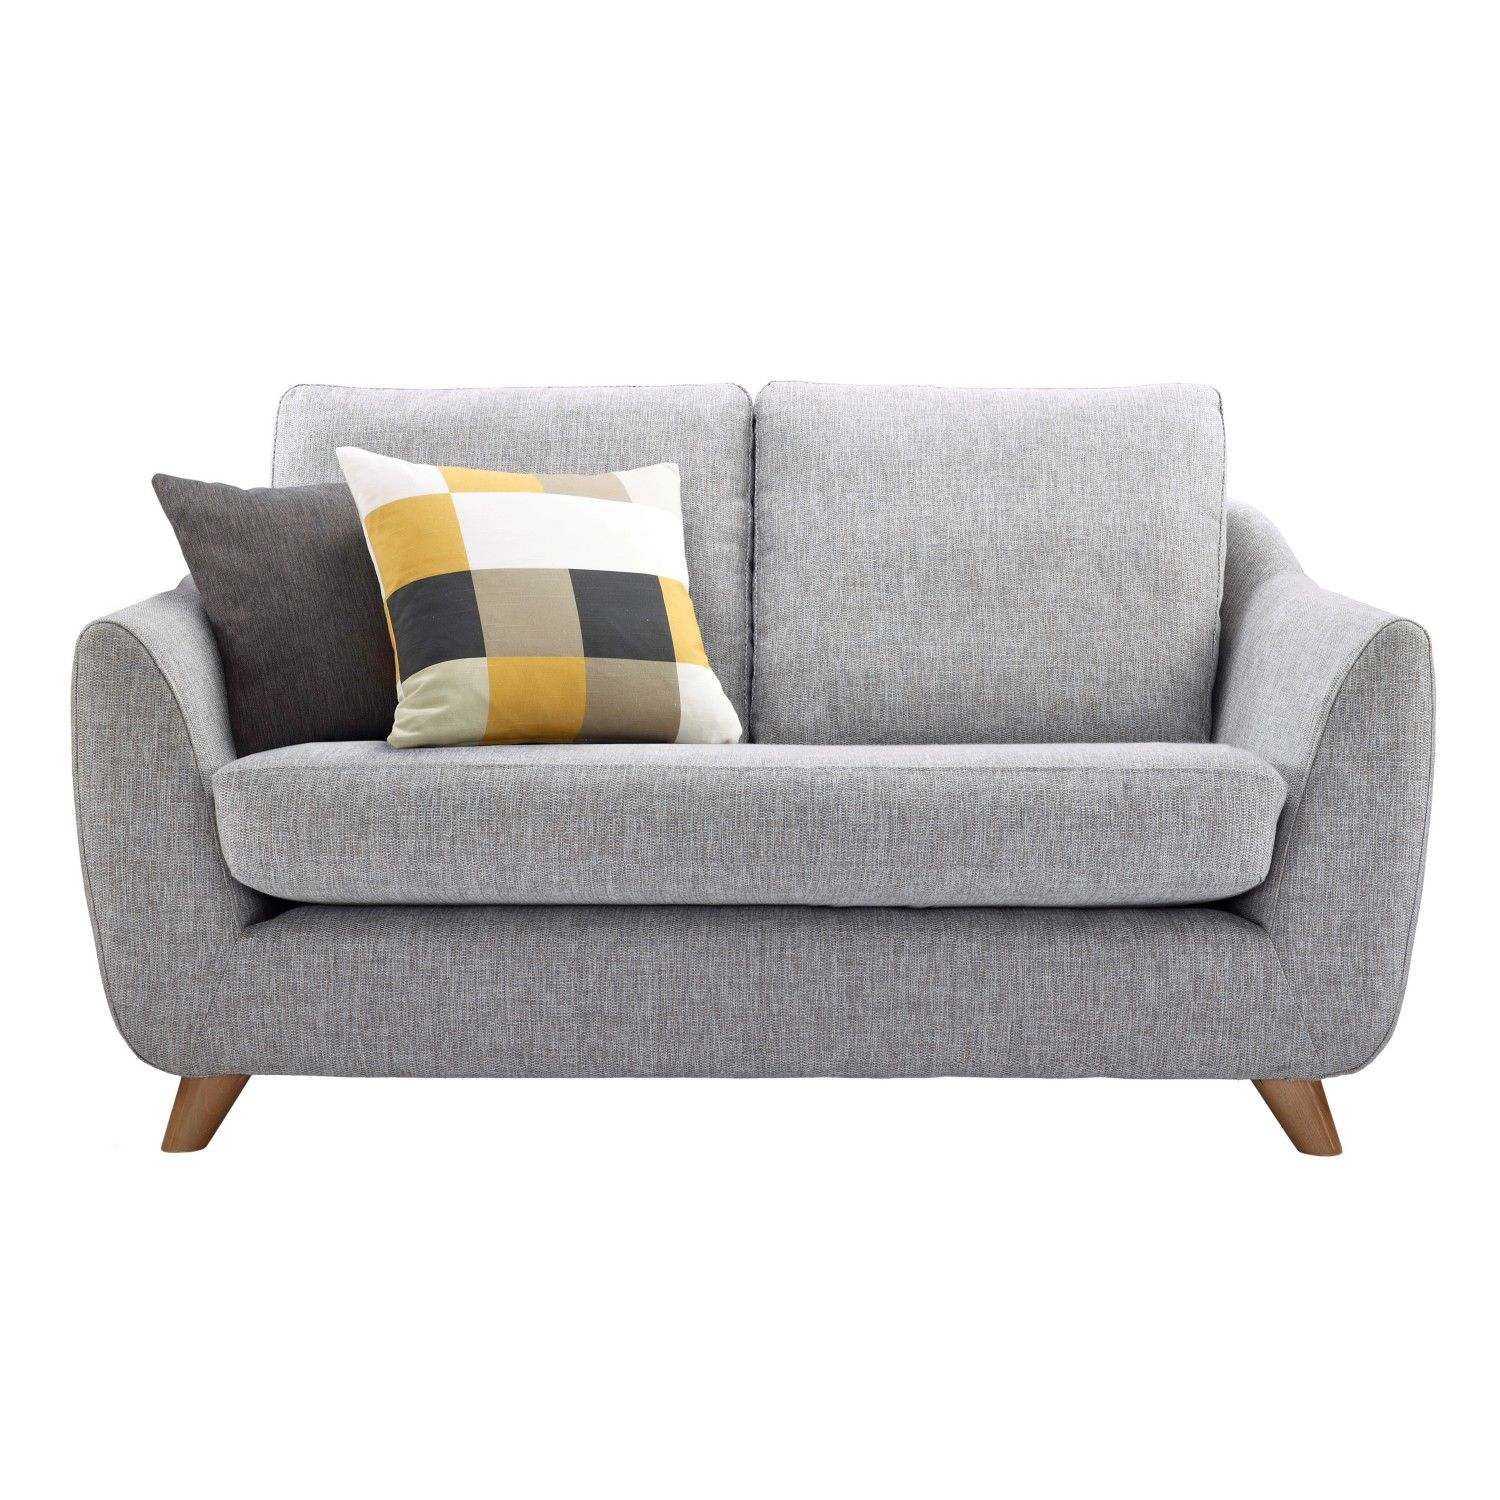 Two-seater sofas for small spaces |  cheap small sofa decoration: fascinating gray CWUTWIO